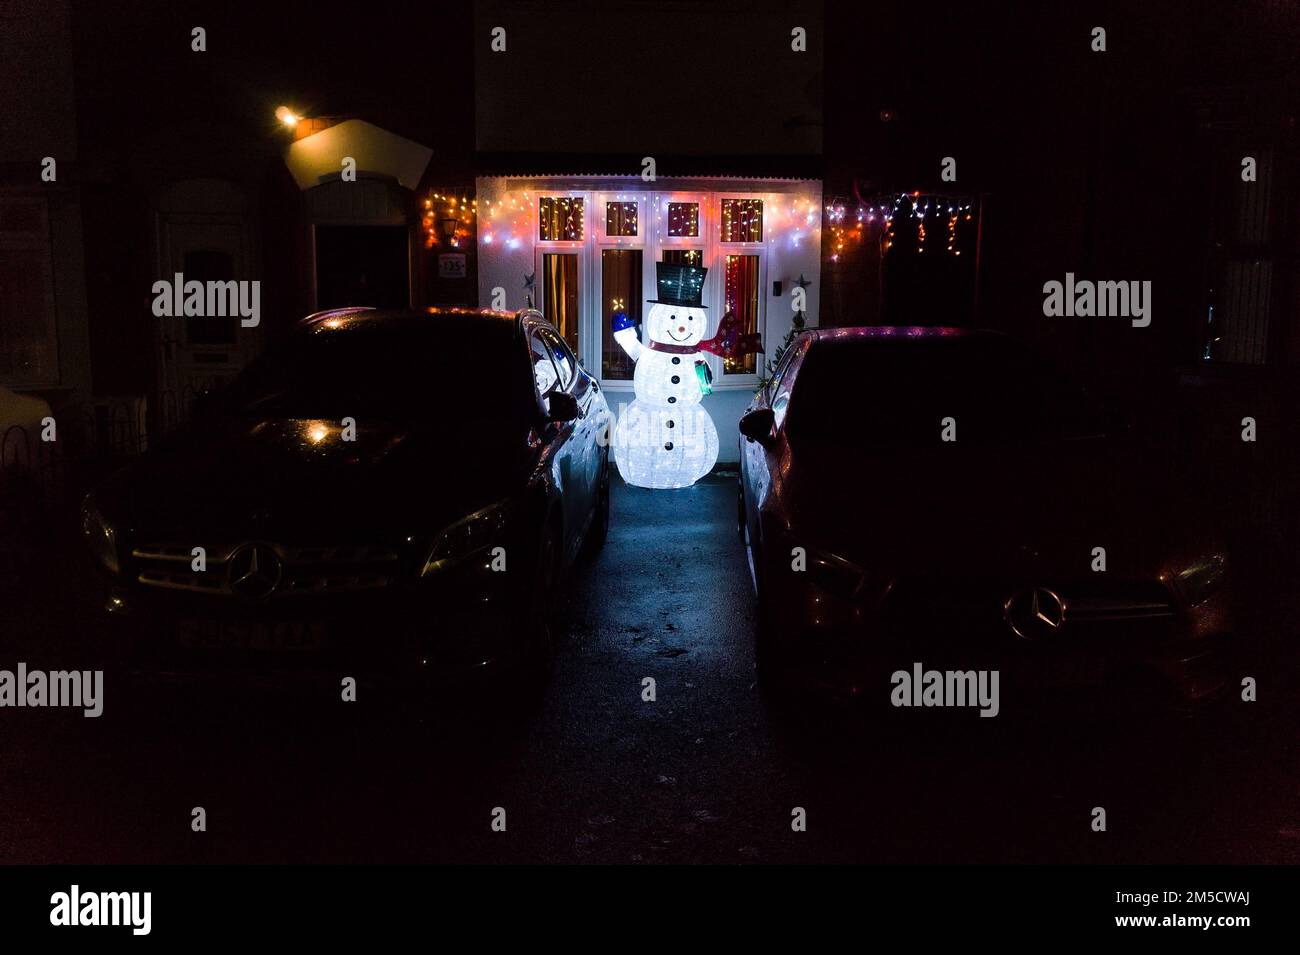 Illuminated snowman statue and Christmas lights in a driveway outside a house at night Stock Photo